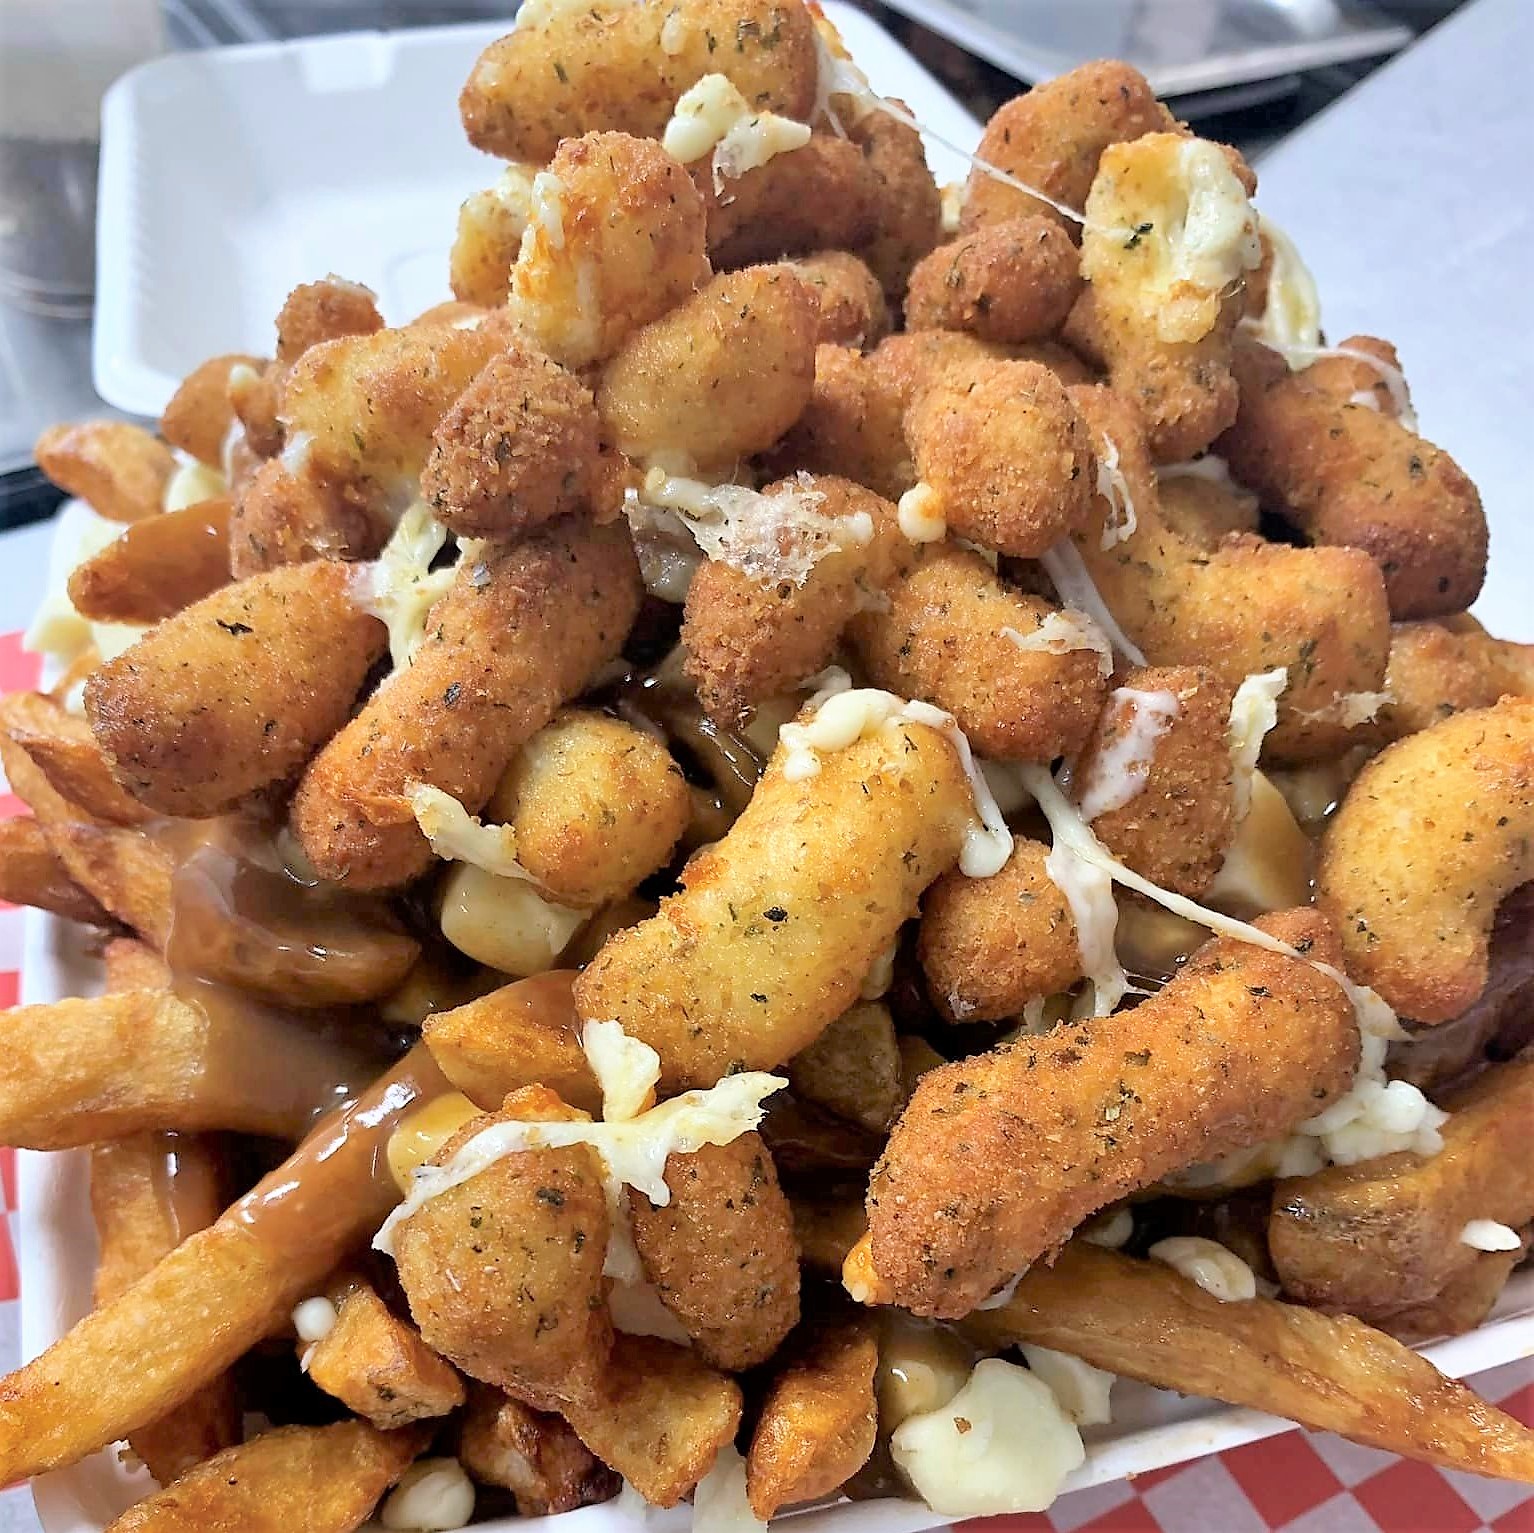 A mountain of deep fried cheese curds on top of poutine